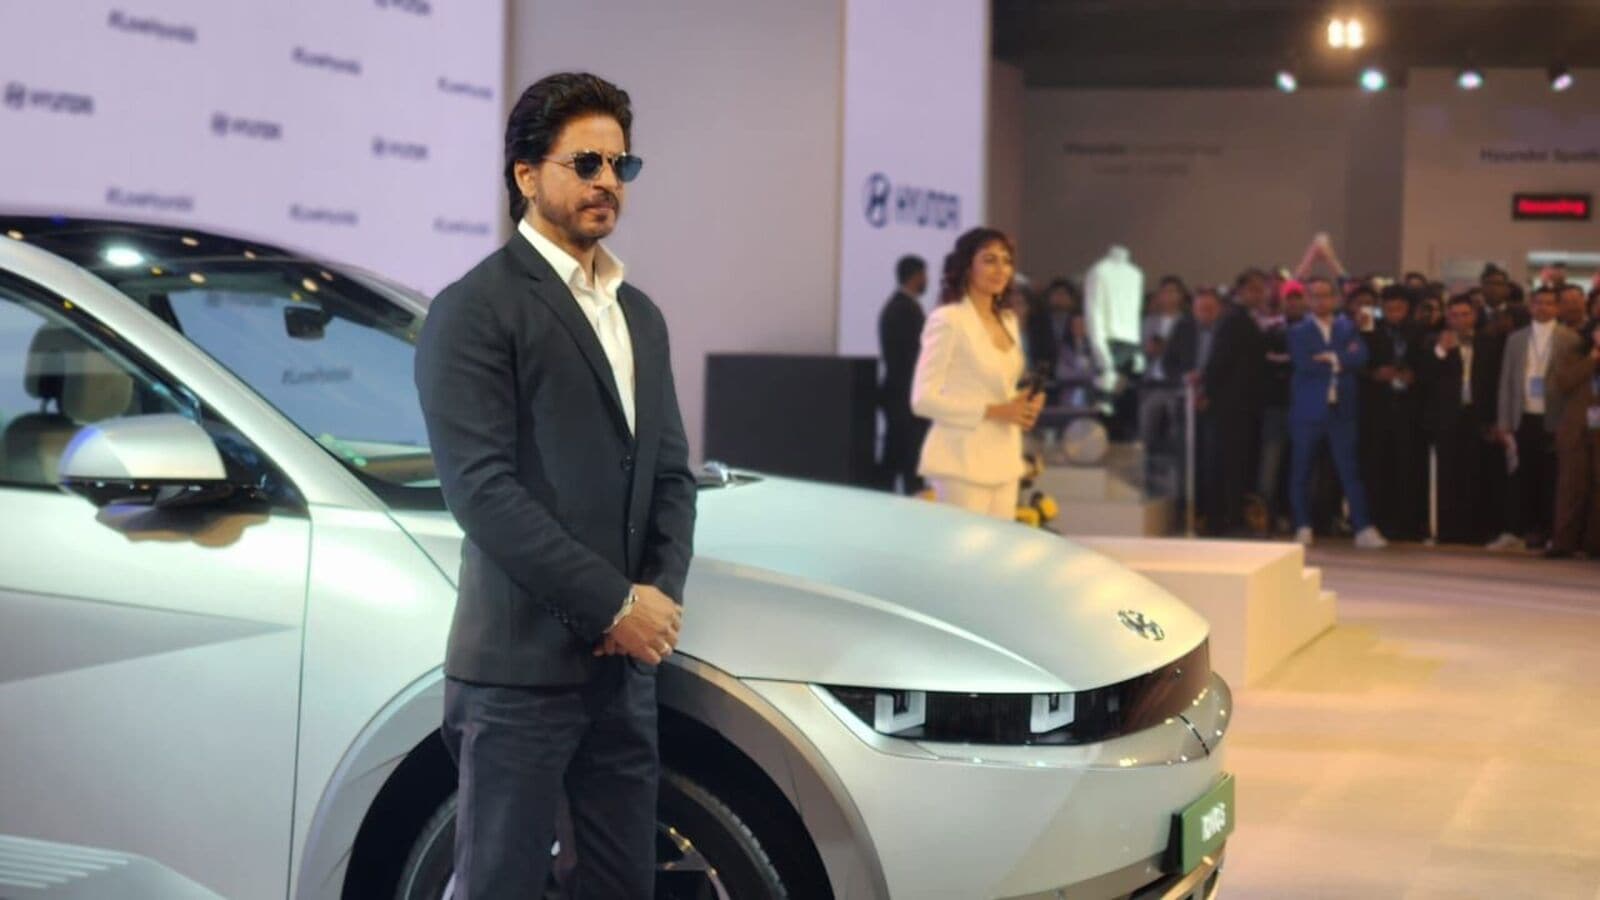 Hyundai Ioniq 5 Launched In India By Shah Rukh Khan, Priced At Rs 44.95 Lakh